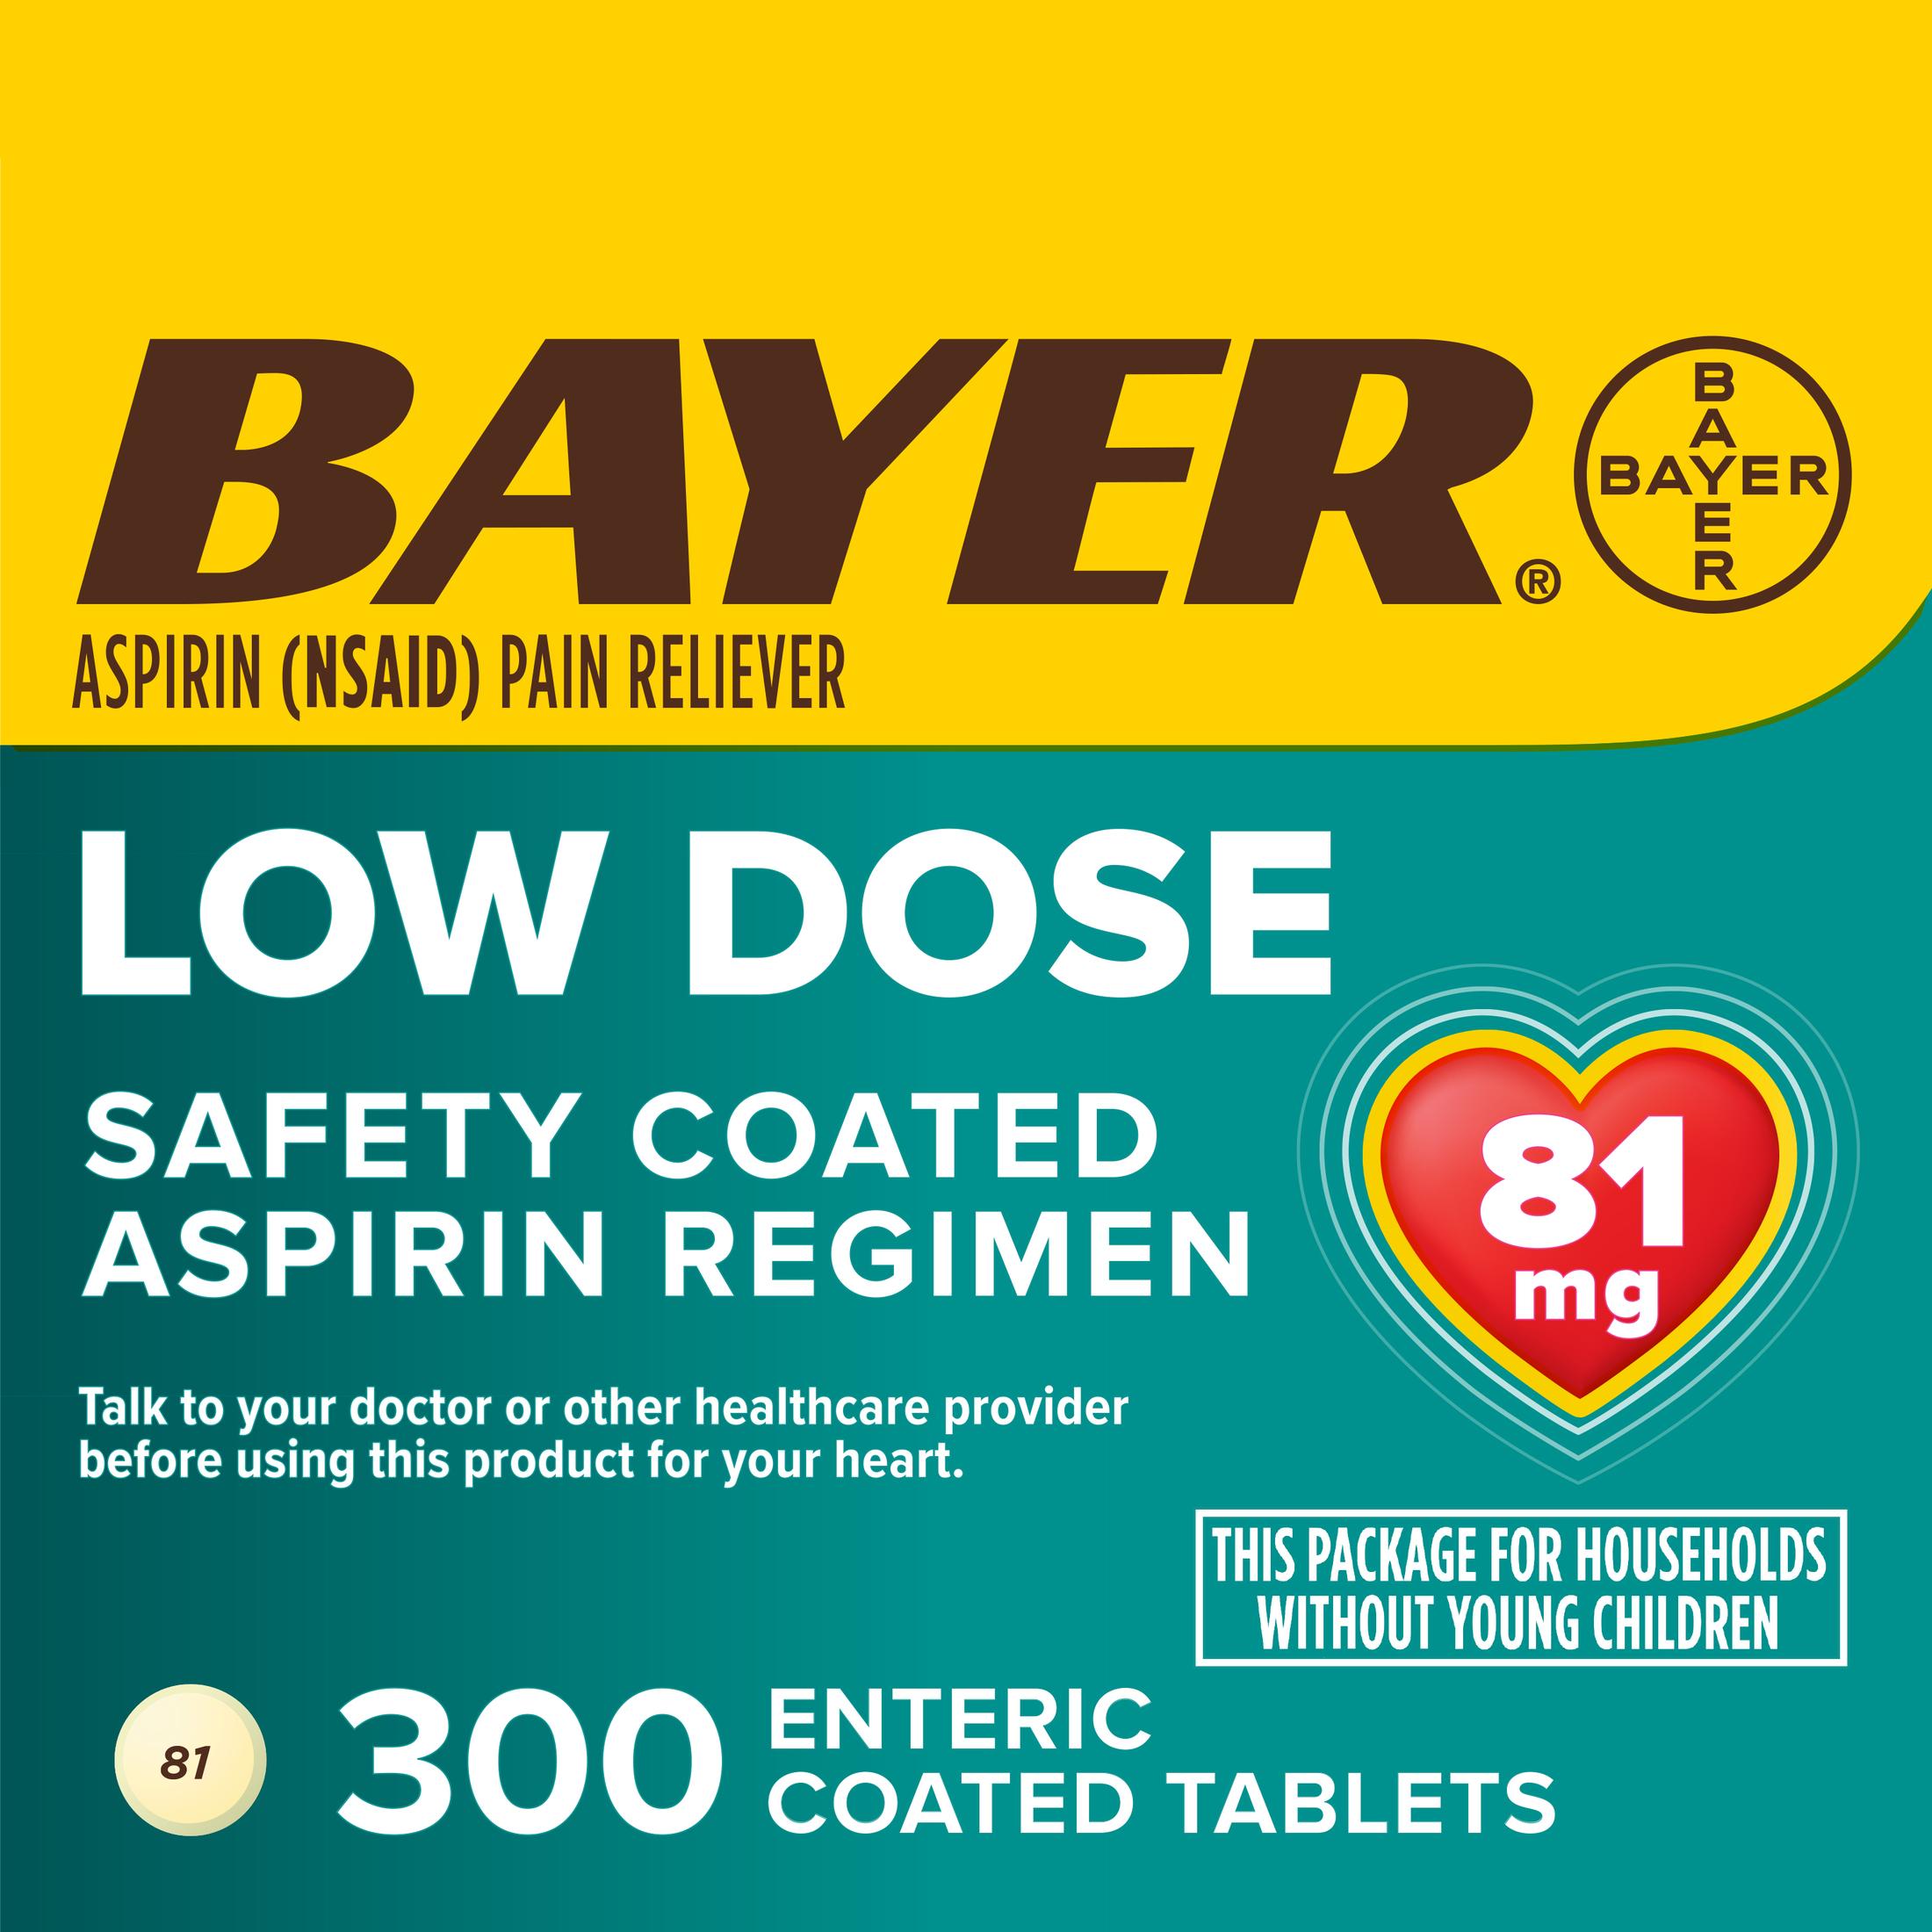 Aspirin Regimen Bayer Low Dose Pain Reliever Enteric Coated Tablets, 81mg, 300 Count - image 1 of 18